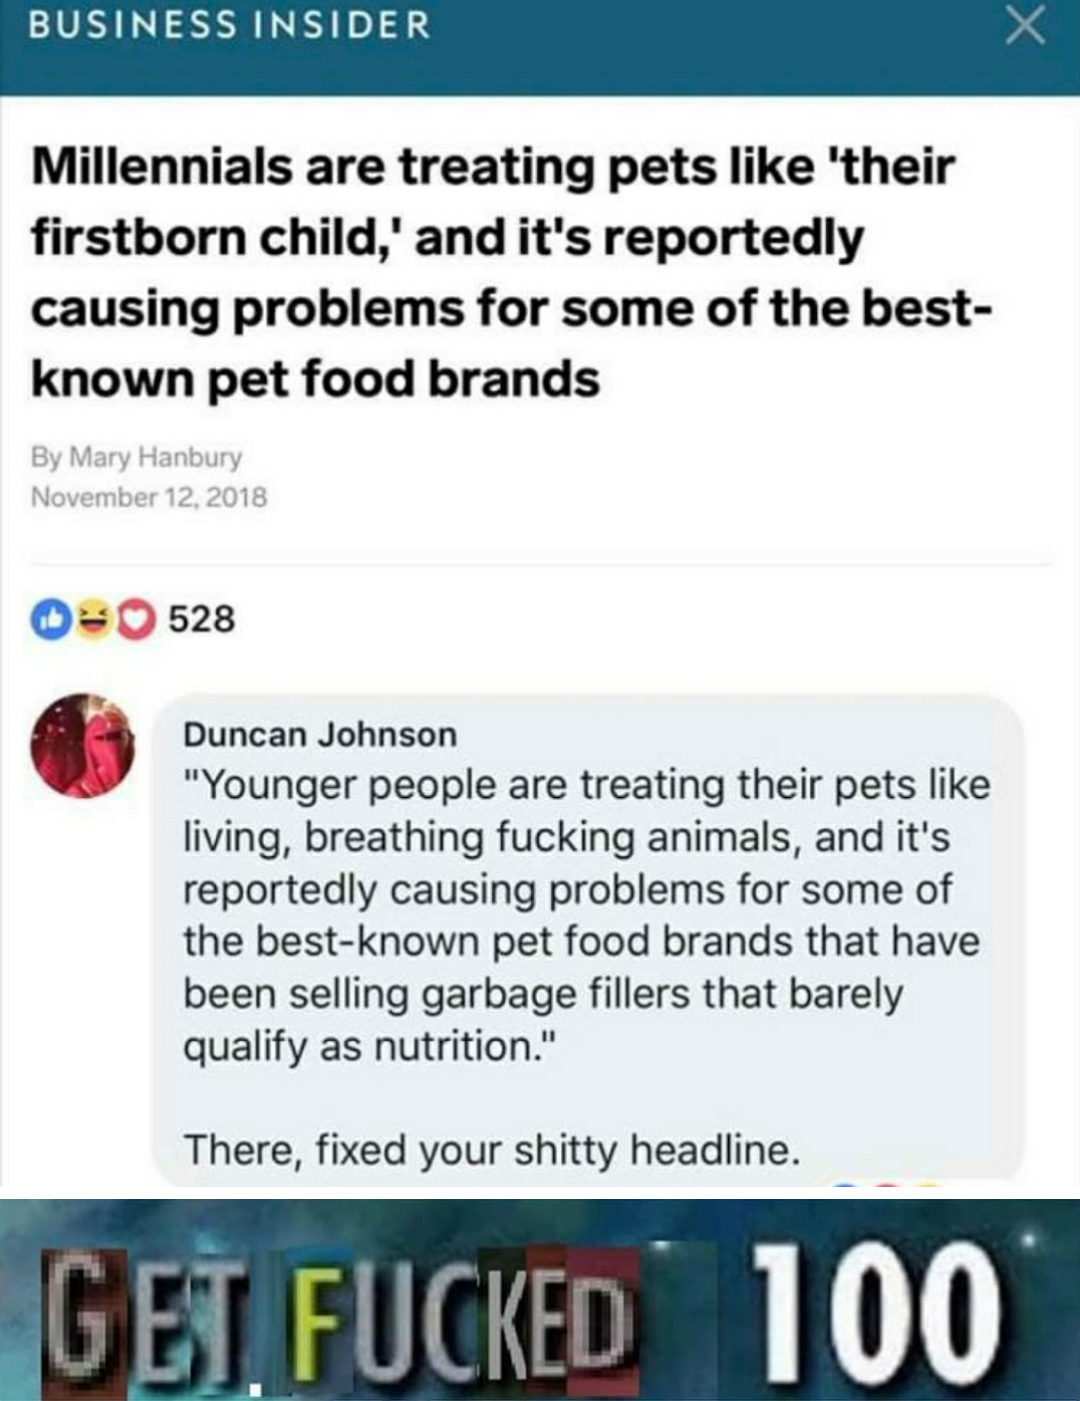 cool pics and funny memes -  millennials pet food - Business Insider Millennials are treating pets 'their firstborn child,' and it's reportedly causing problems for some of the best known pet food brands By Mary Hanbury 528 Duncan Johnson "Younger people 